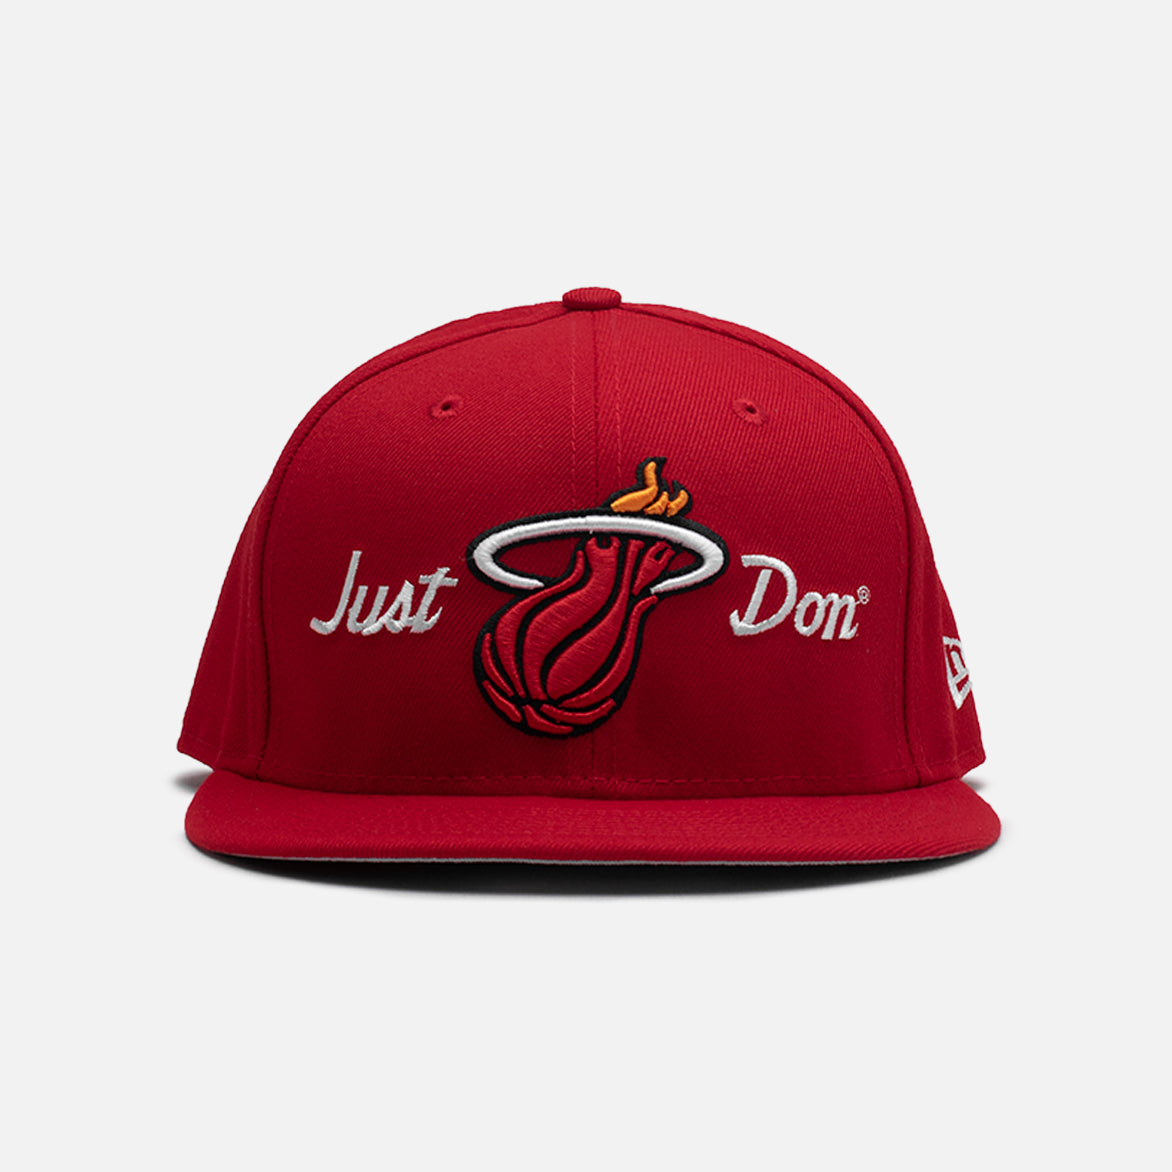 New Era Cap Style on Instagram: The Just Don x NBA Collection is